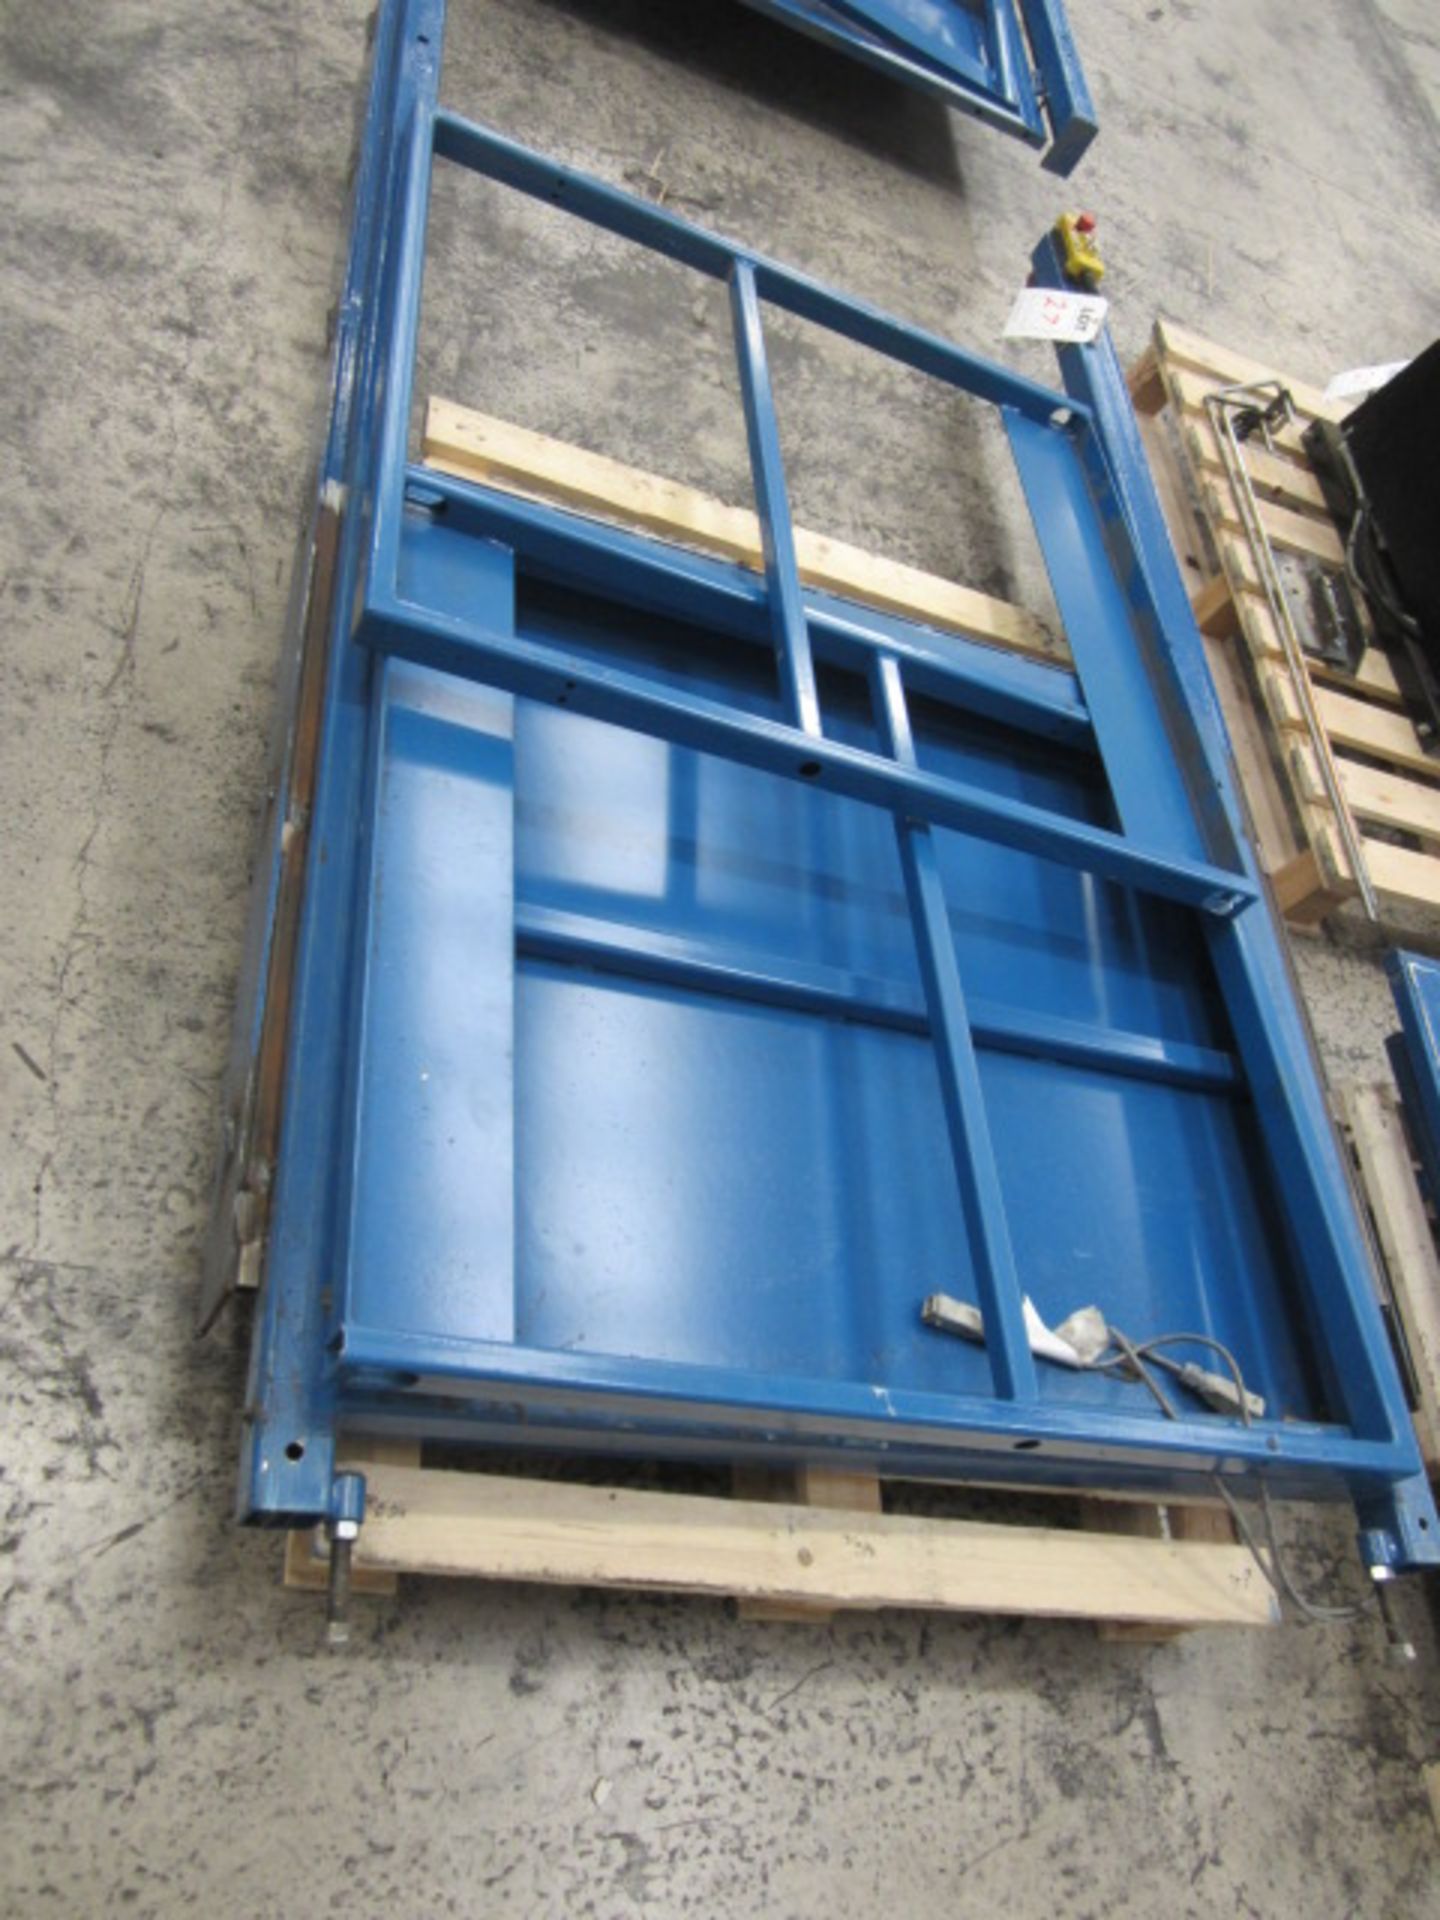 Saxon hydraulic lift table, approx. table size 1.9m x 1m with smeshed side, SWL 500kgs - dismantled. - Image 2 of 8